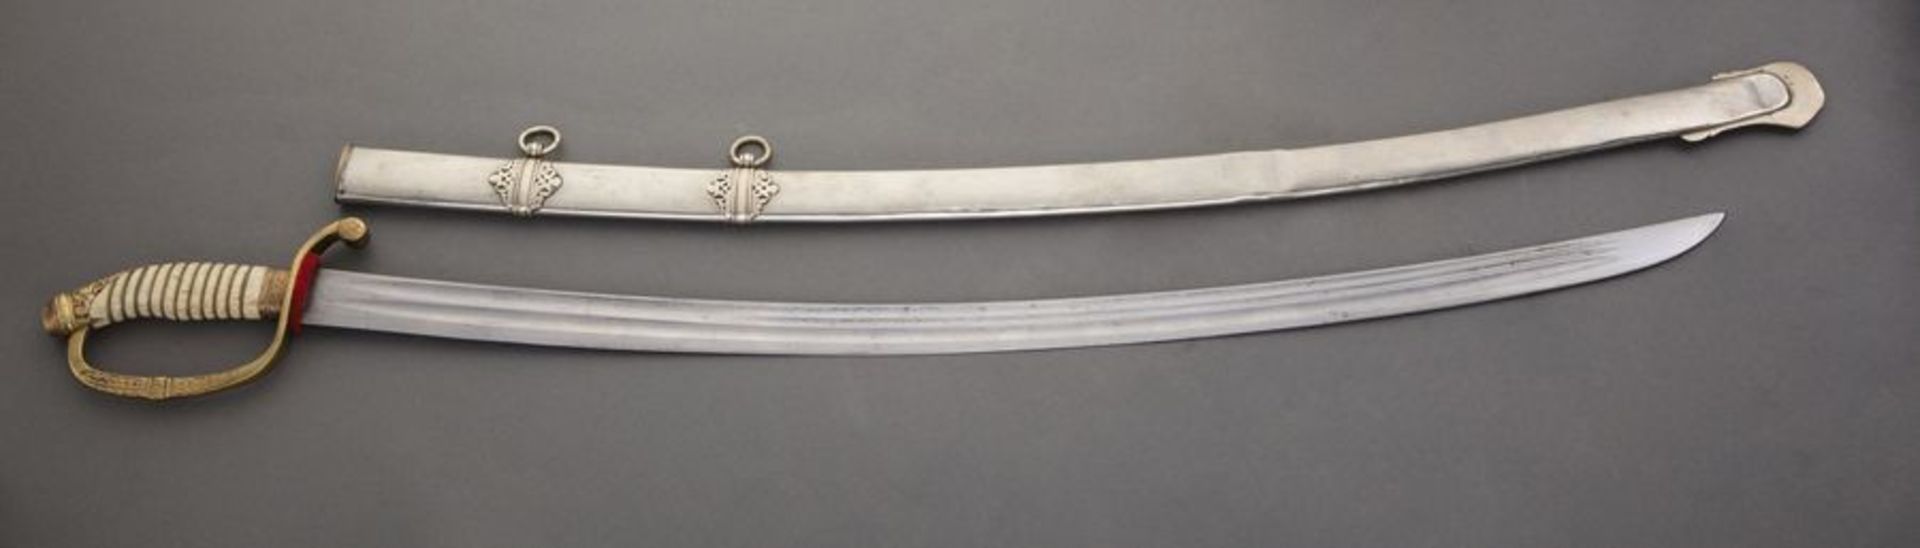 Senior of cer’s and general’s Infantry Sabre, in the style of Russian Of cer’s [...]